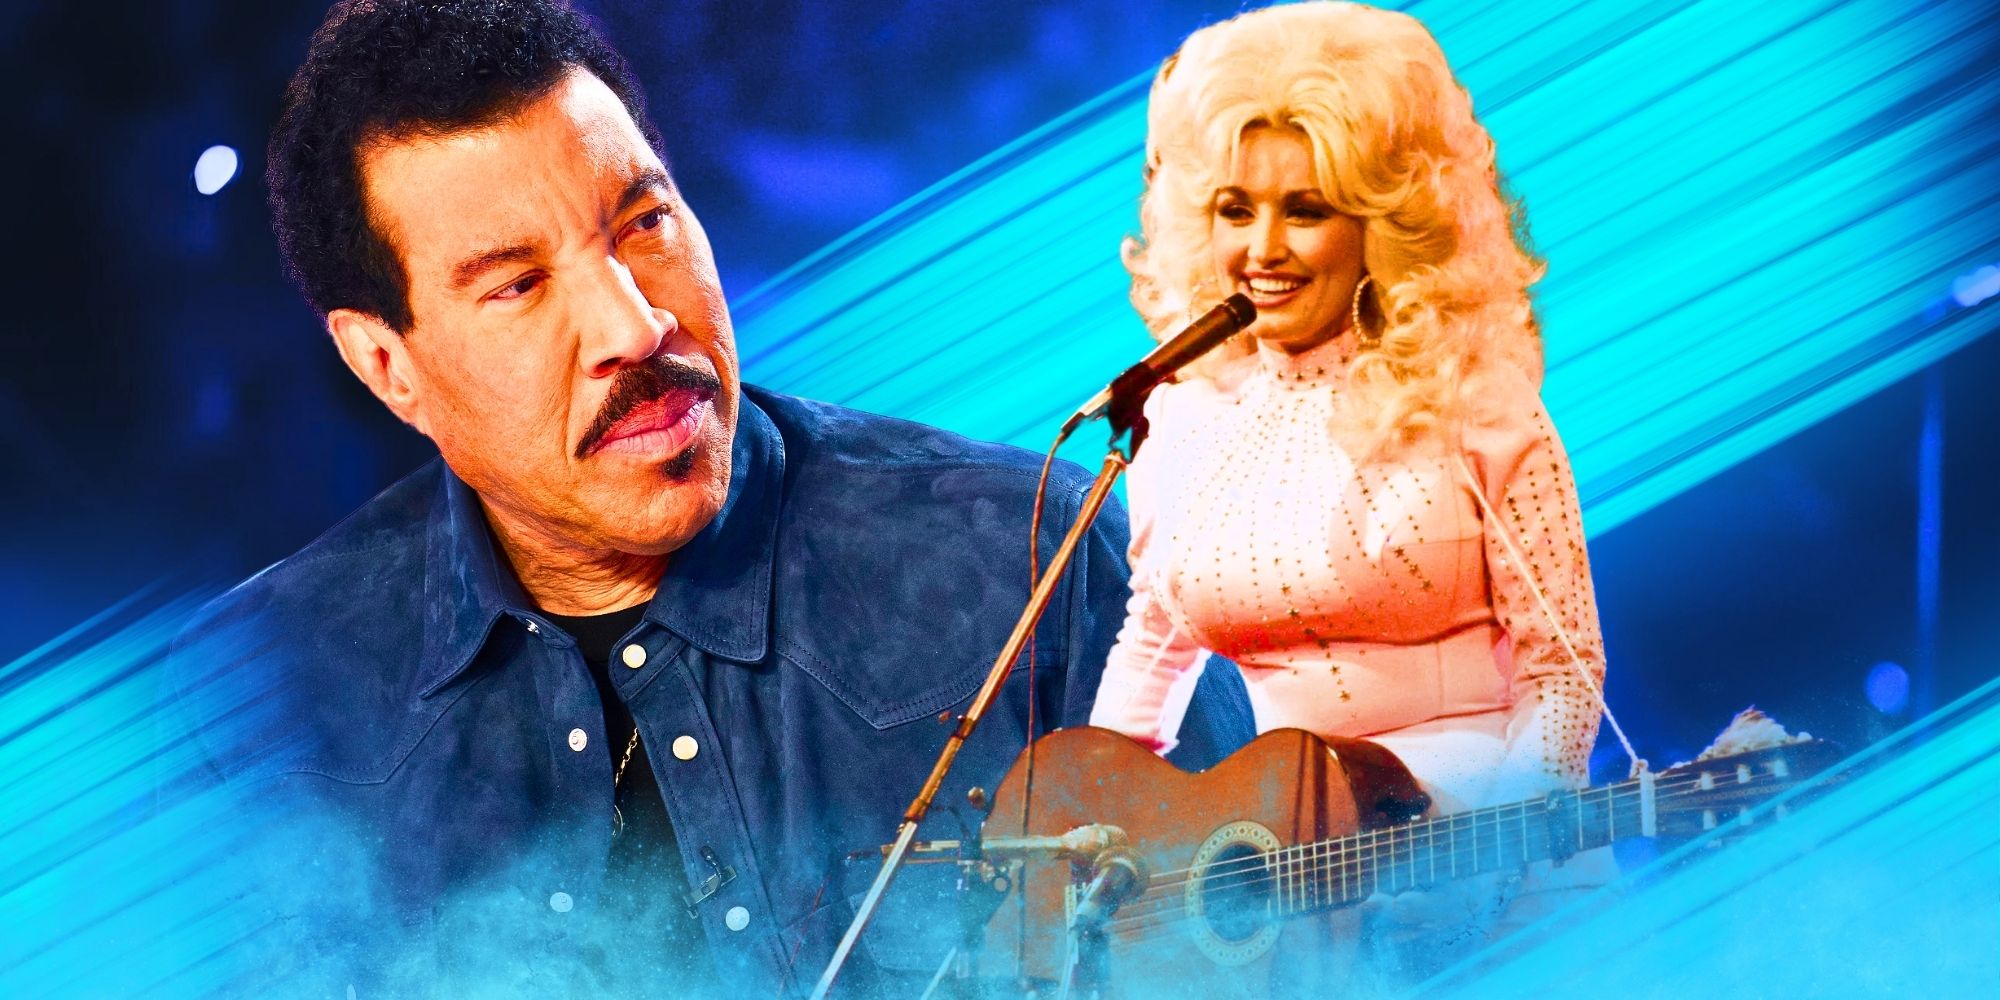 American Idol's Lionel Richie staring at Dolly Parton, who's performing at a mic with a guitar